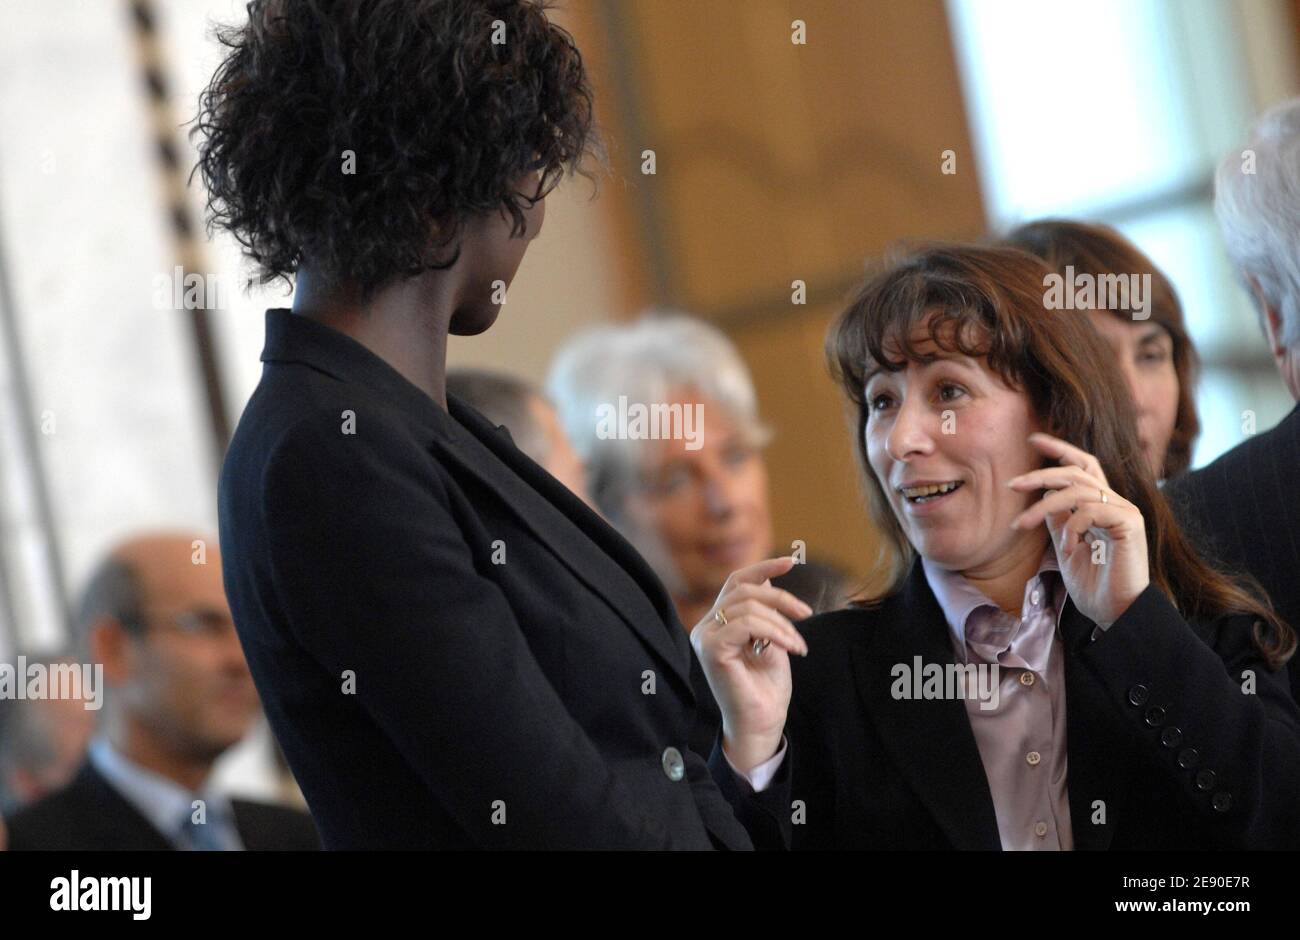 Rama Yade and Fadela Amara attend a commercial agreement signing ceremony in Algiers, Algeria on December 4, 2007. Photo by Christophe Guibbaud/ABACAPRESS.COM Stock Photo